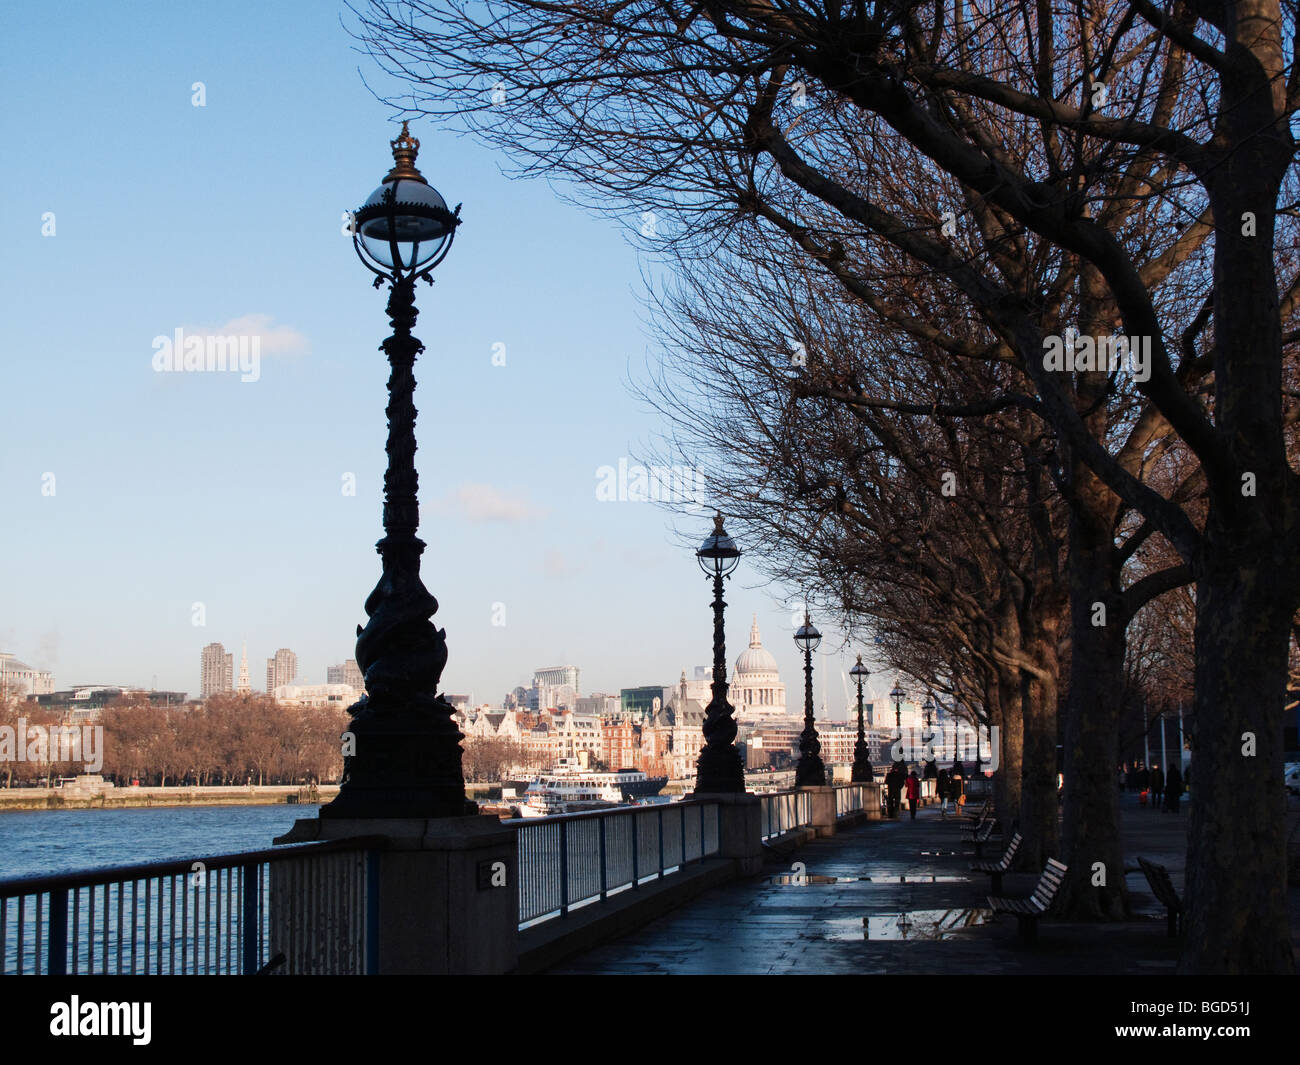 The south bank and river Thames, London Stock Photo